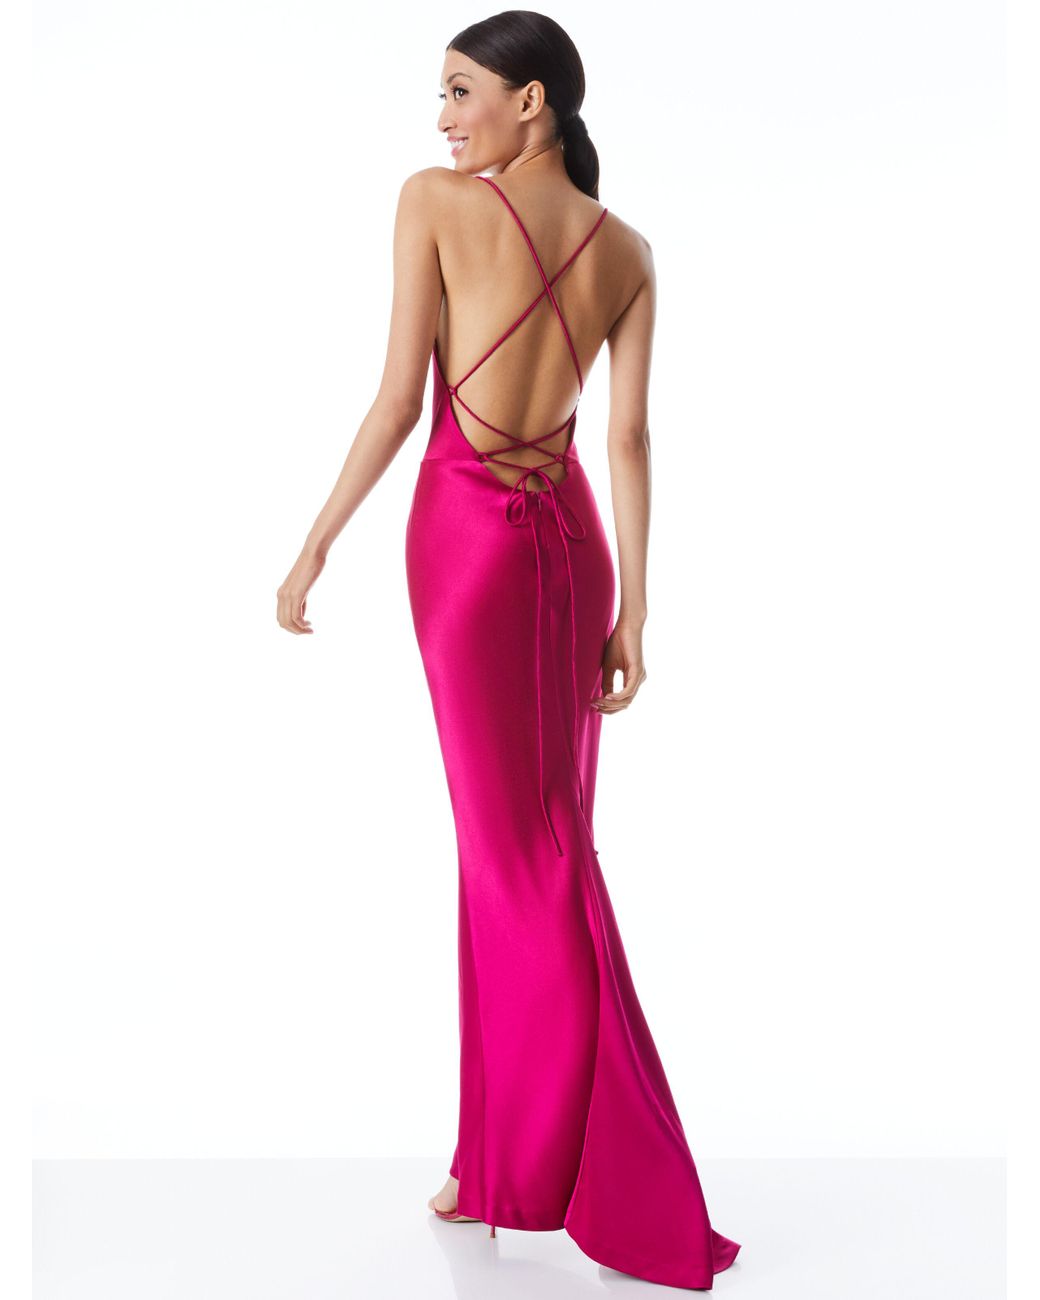 Abbey Glass Olivia Gown Mulberry Pink